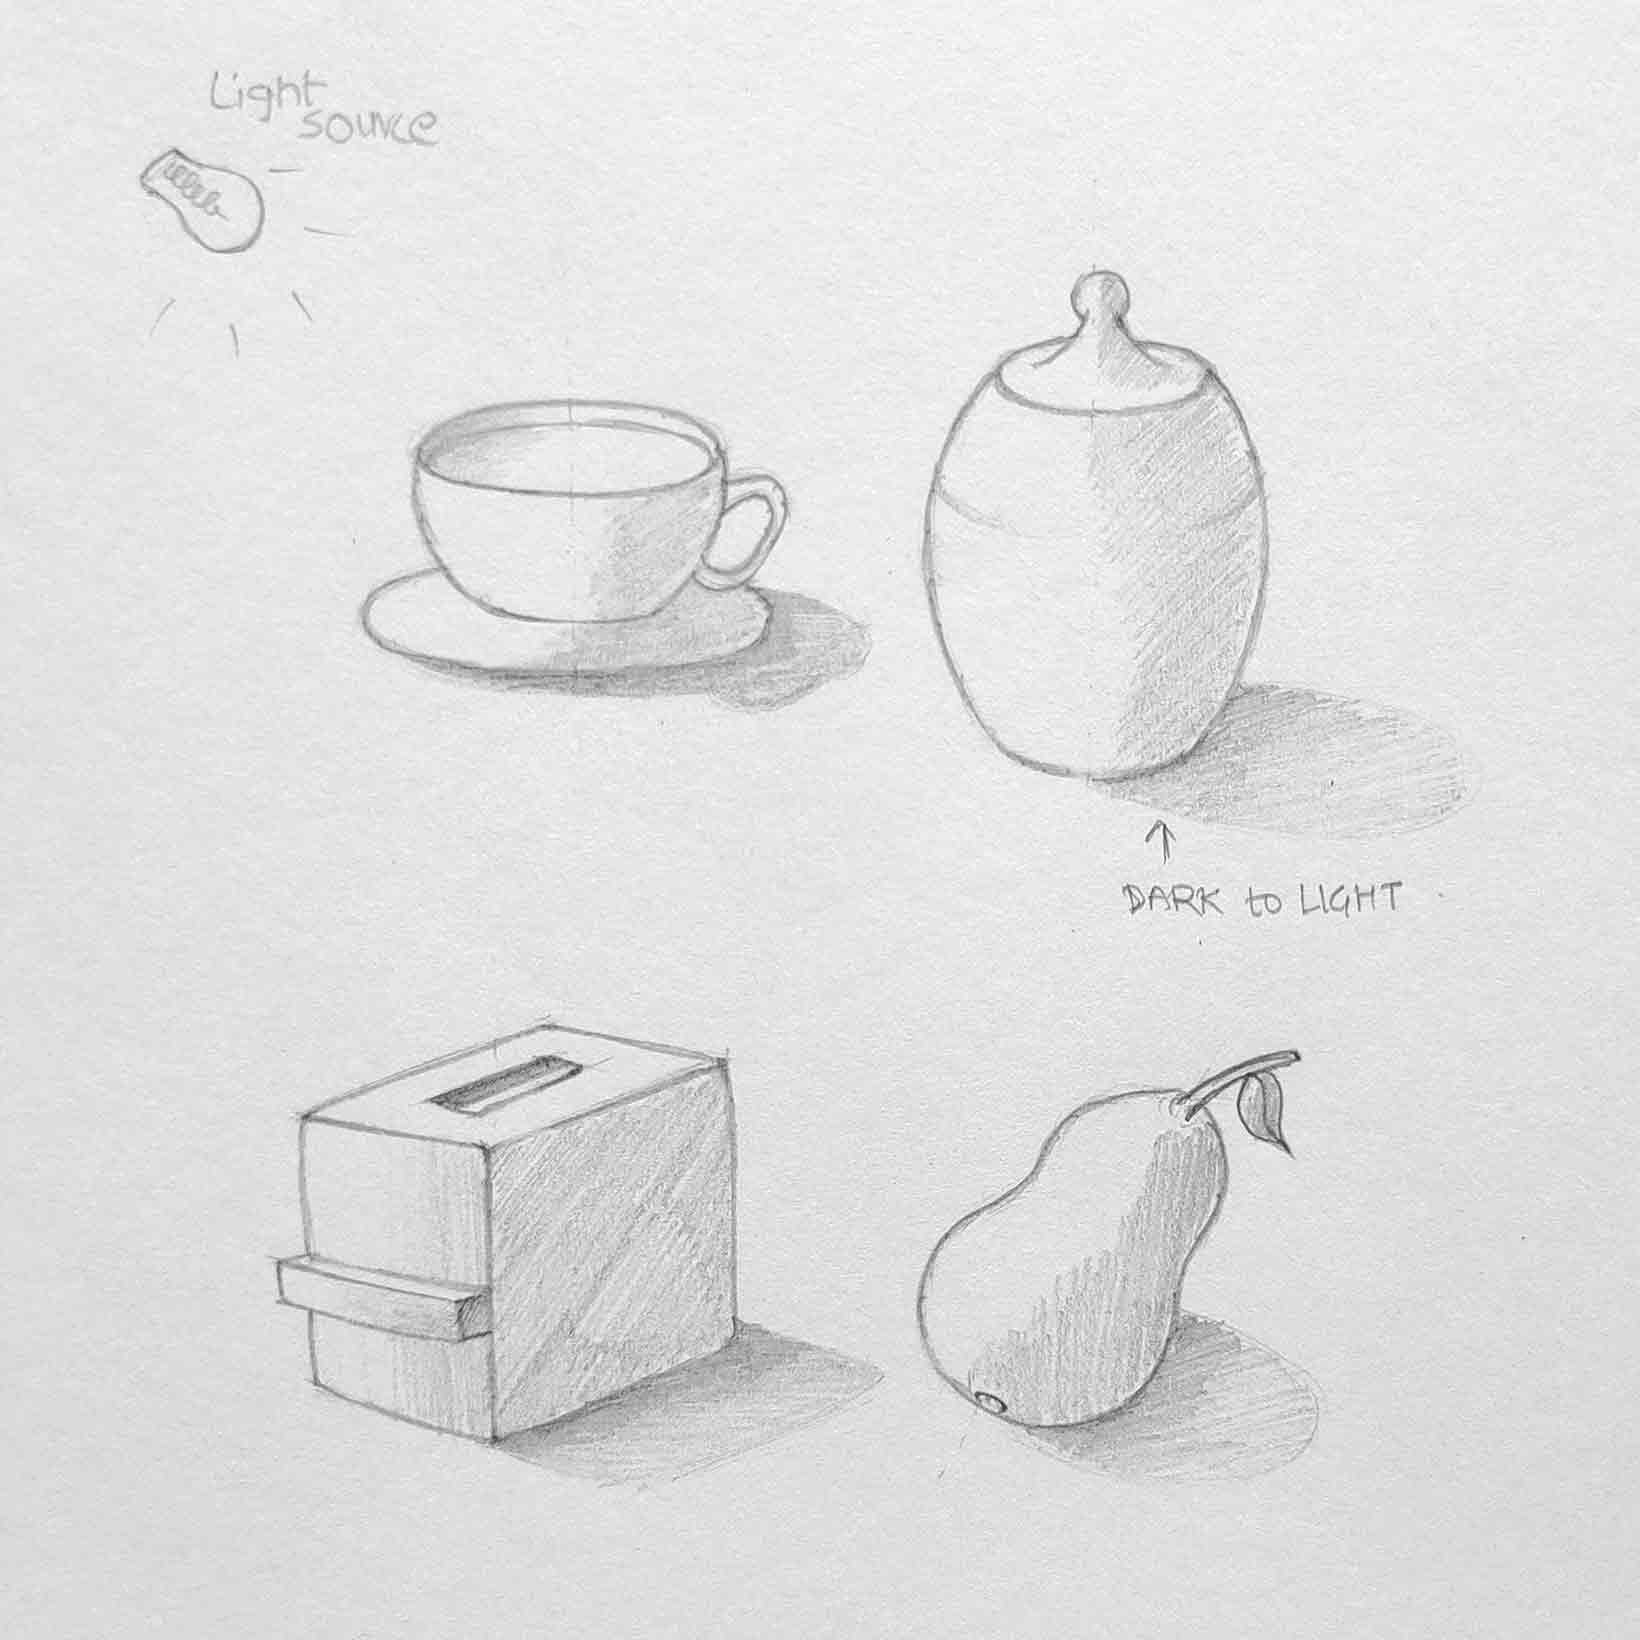 1970s Pitcher and Fruit Still Life Drawing | Chairish